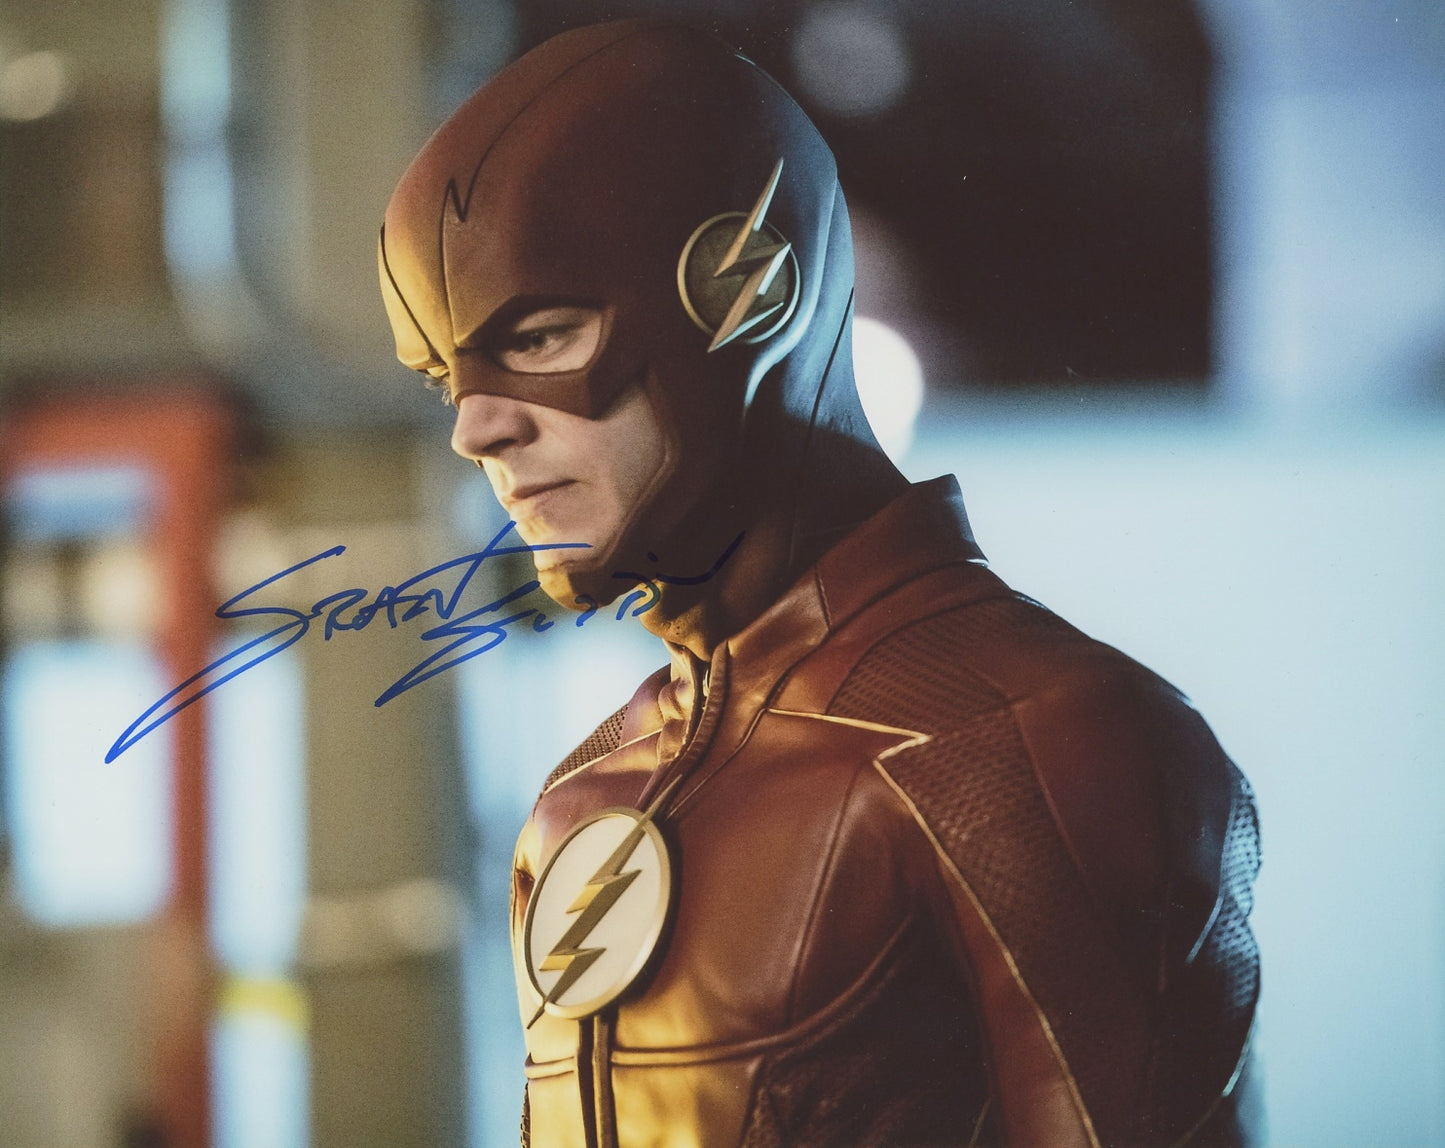 Grant Gustin Signed 8x10 Photo